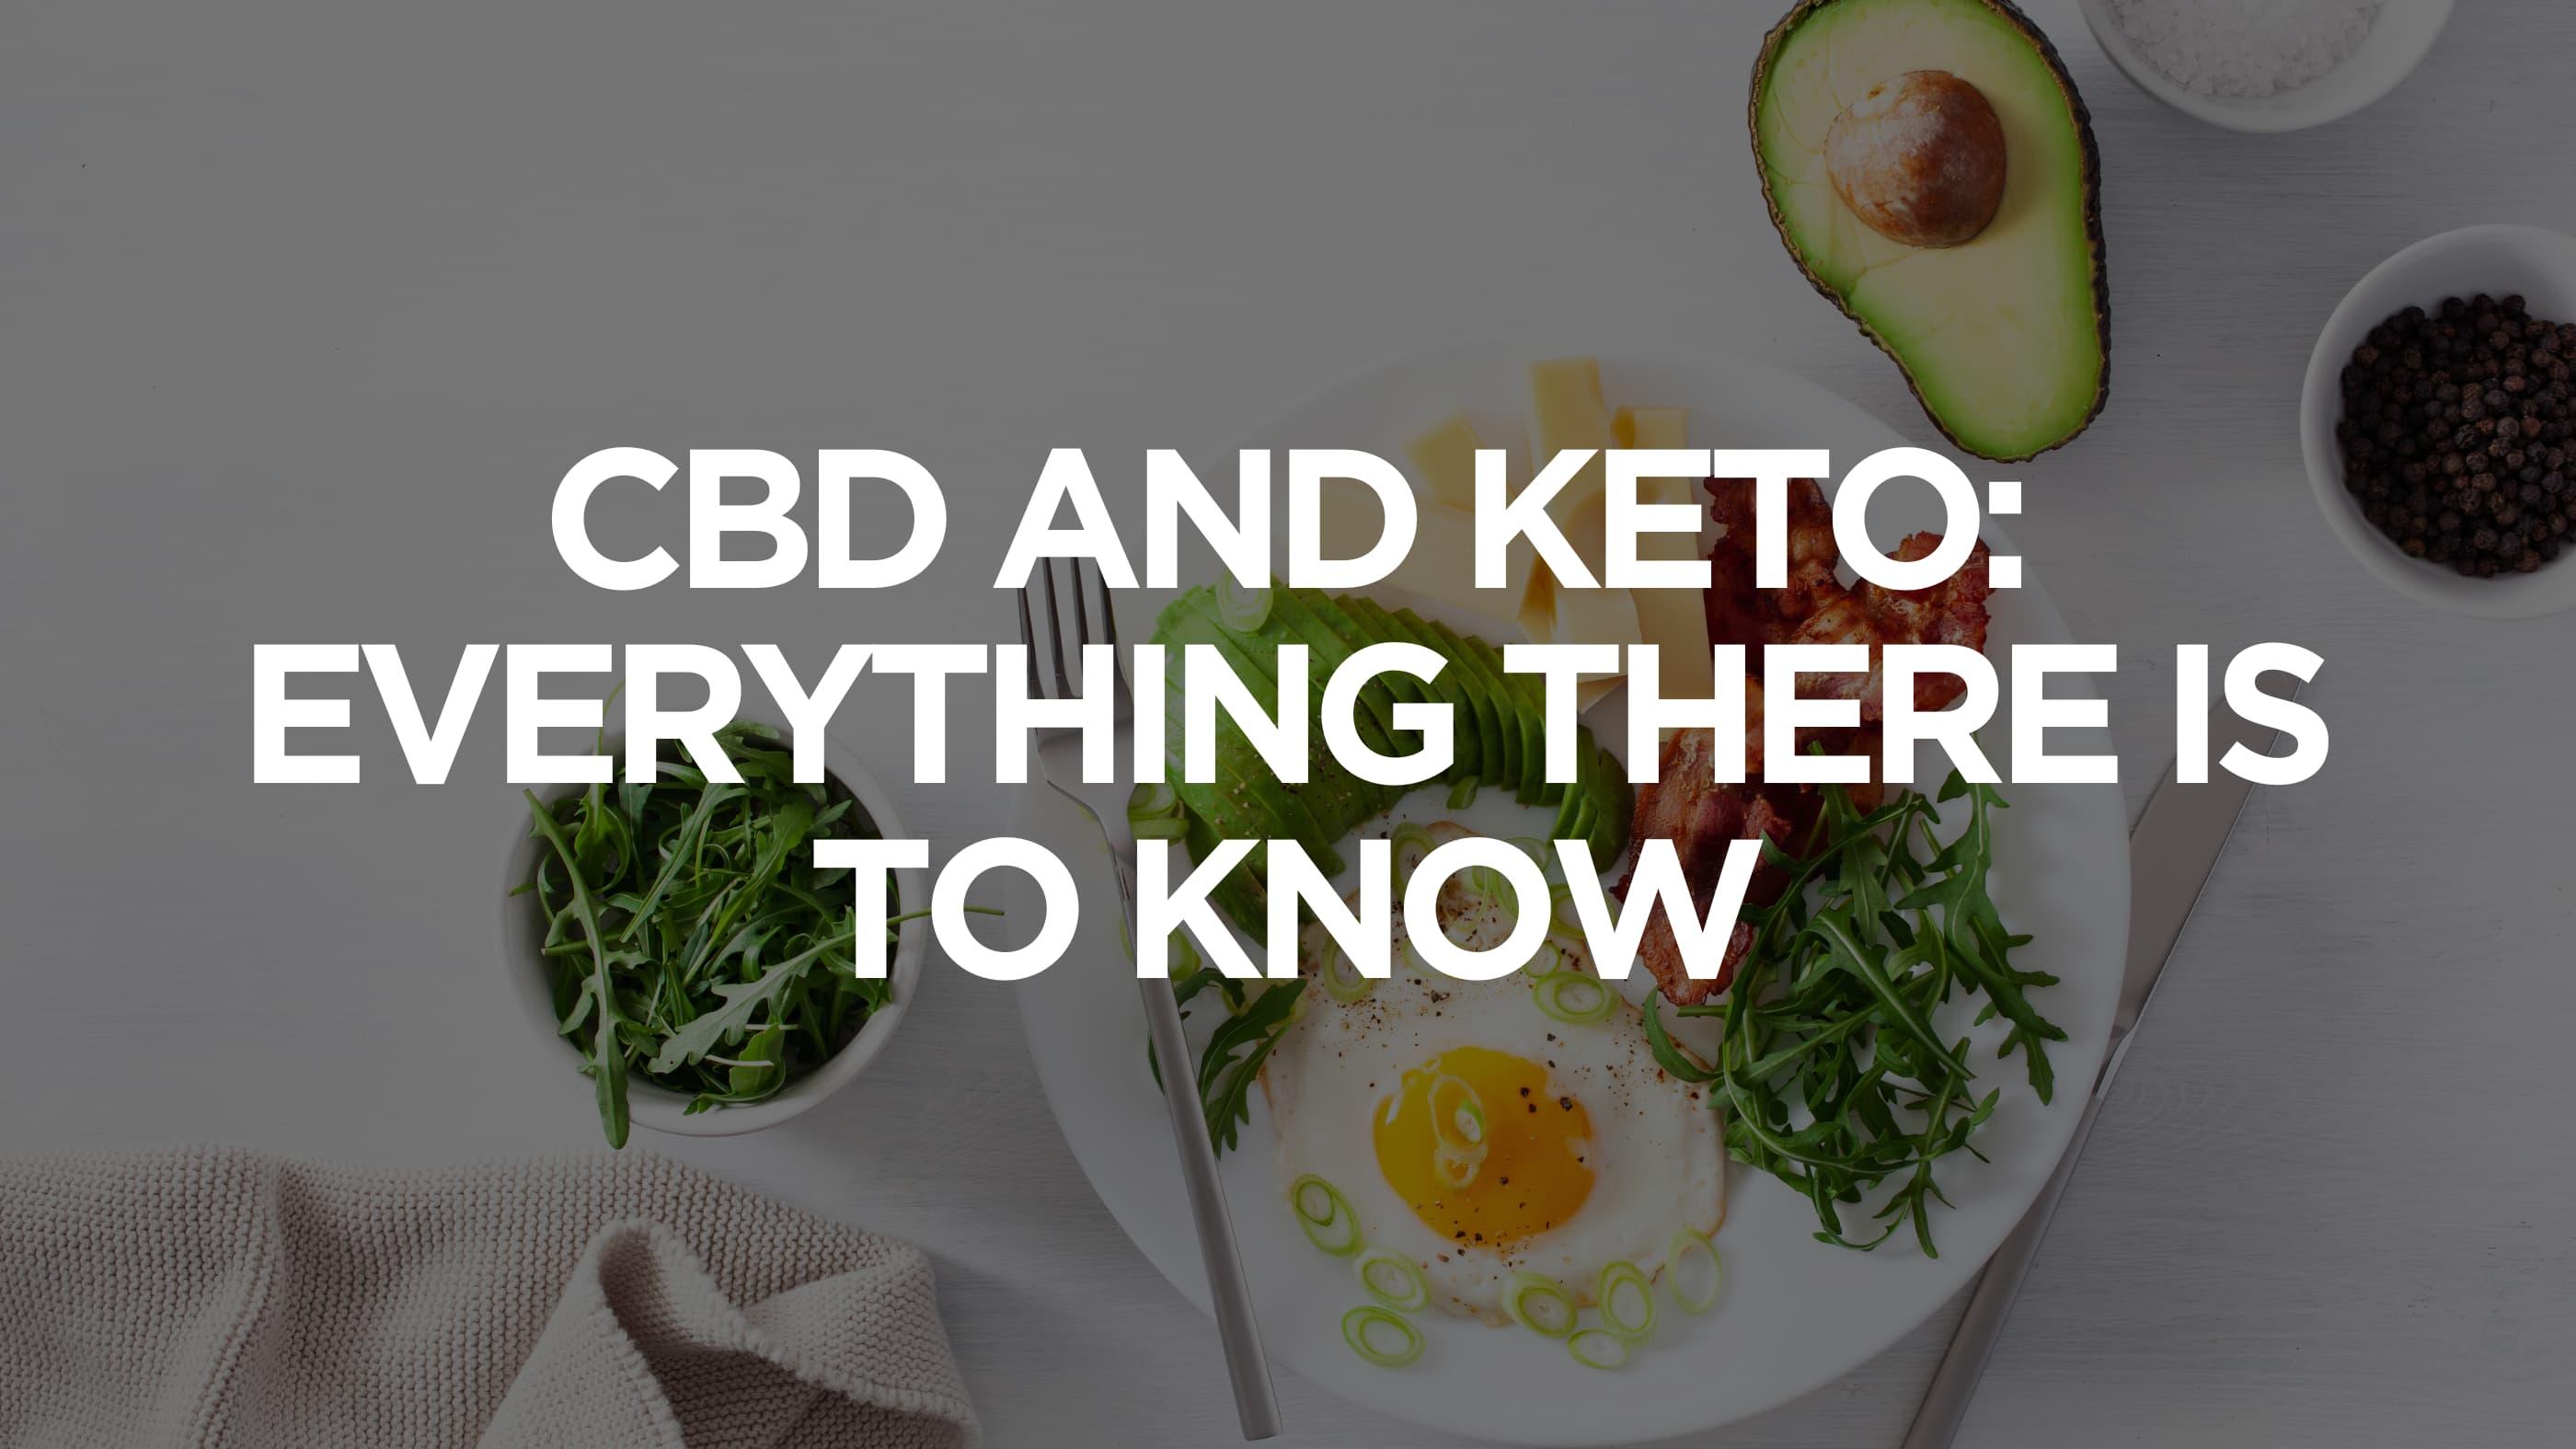 CBD and Keto: Everything There Is to Know About the Ketogenic Diet and CBD Oil